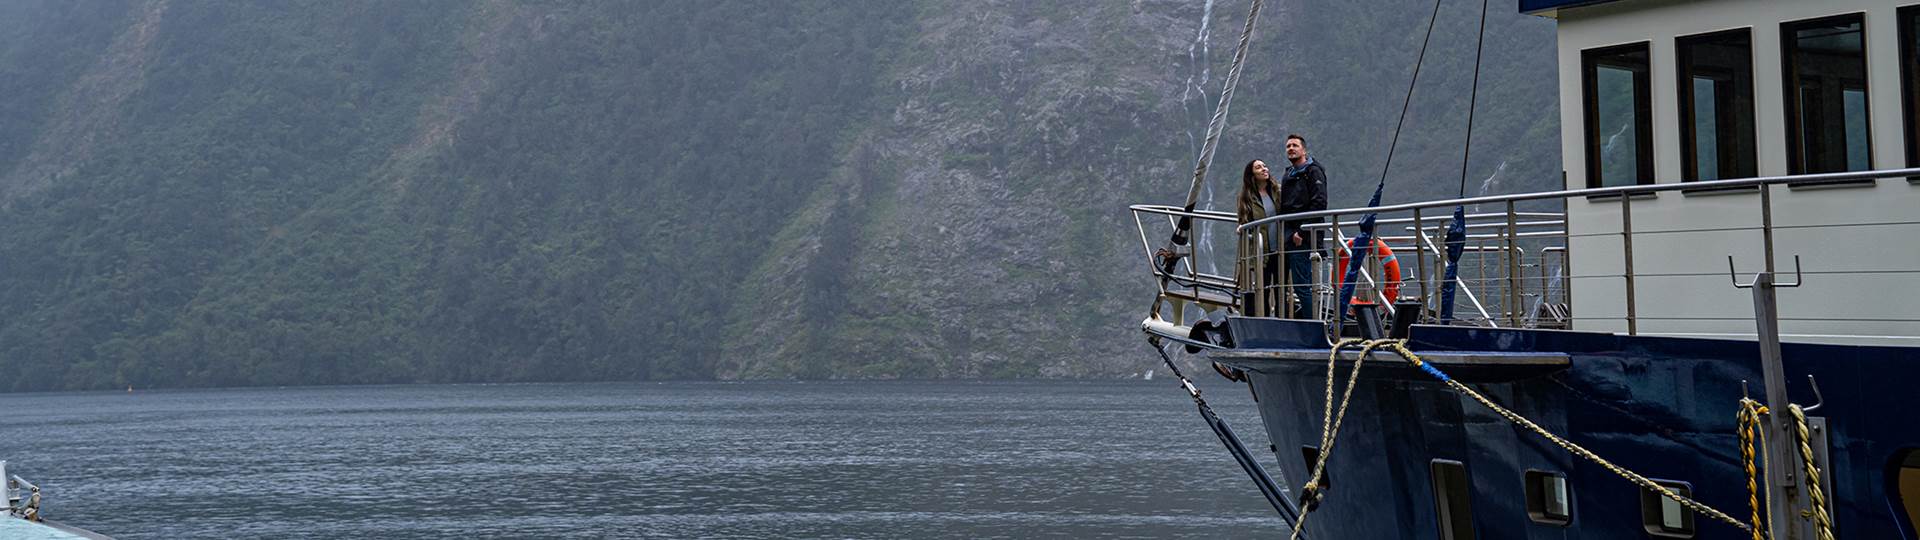 Couple enjoying the view in Doubtful Sound